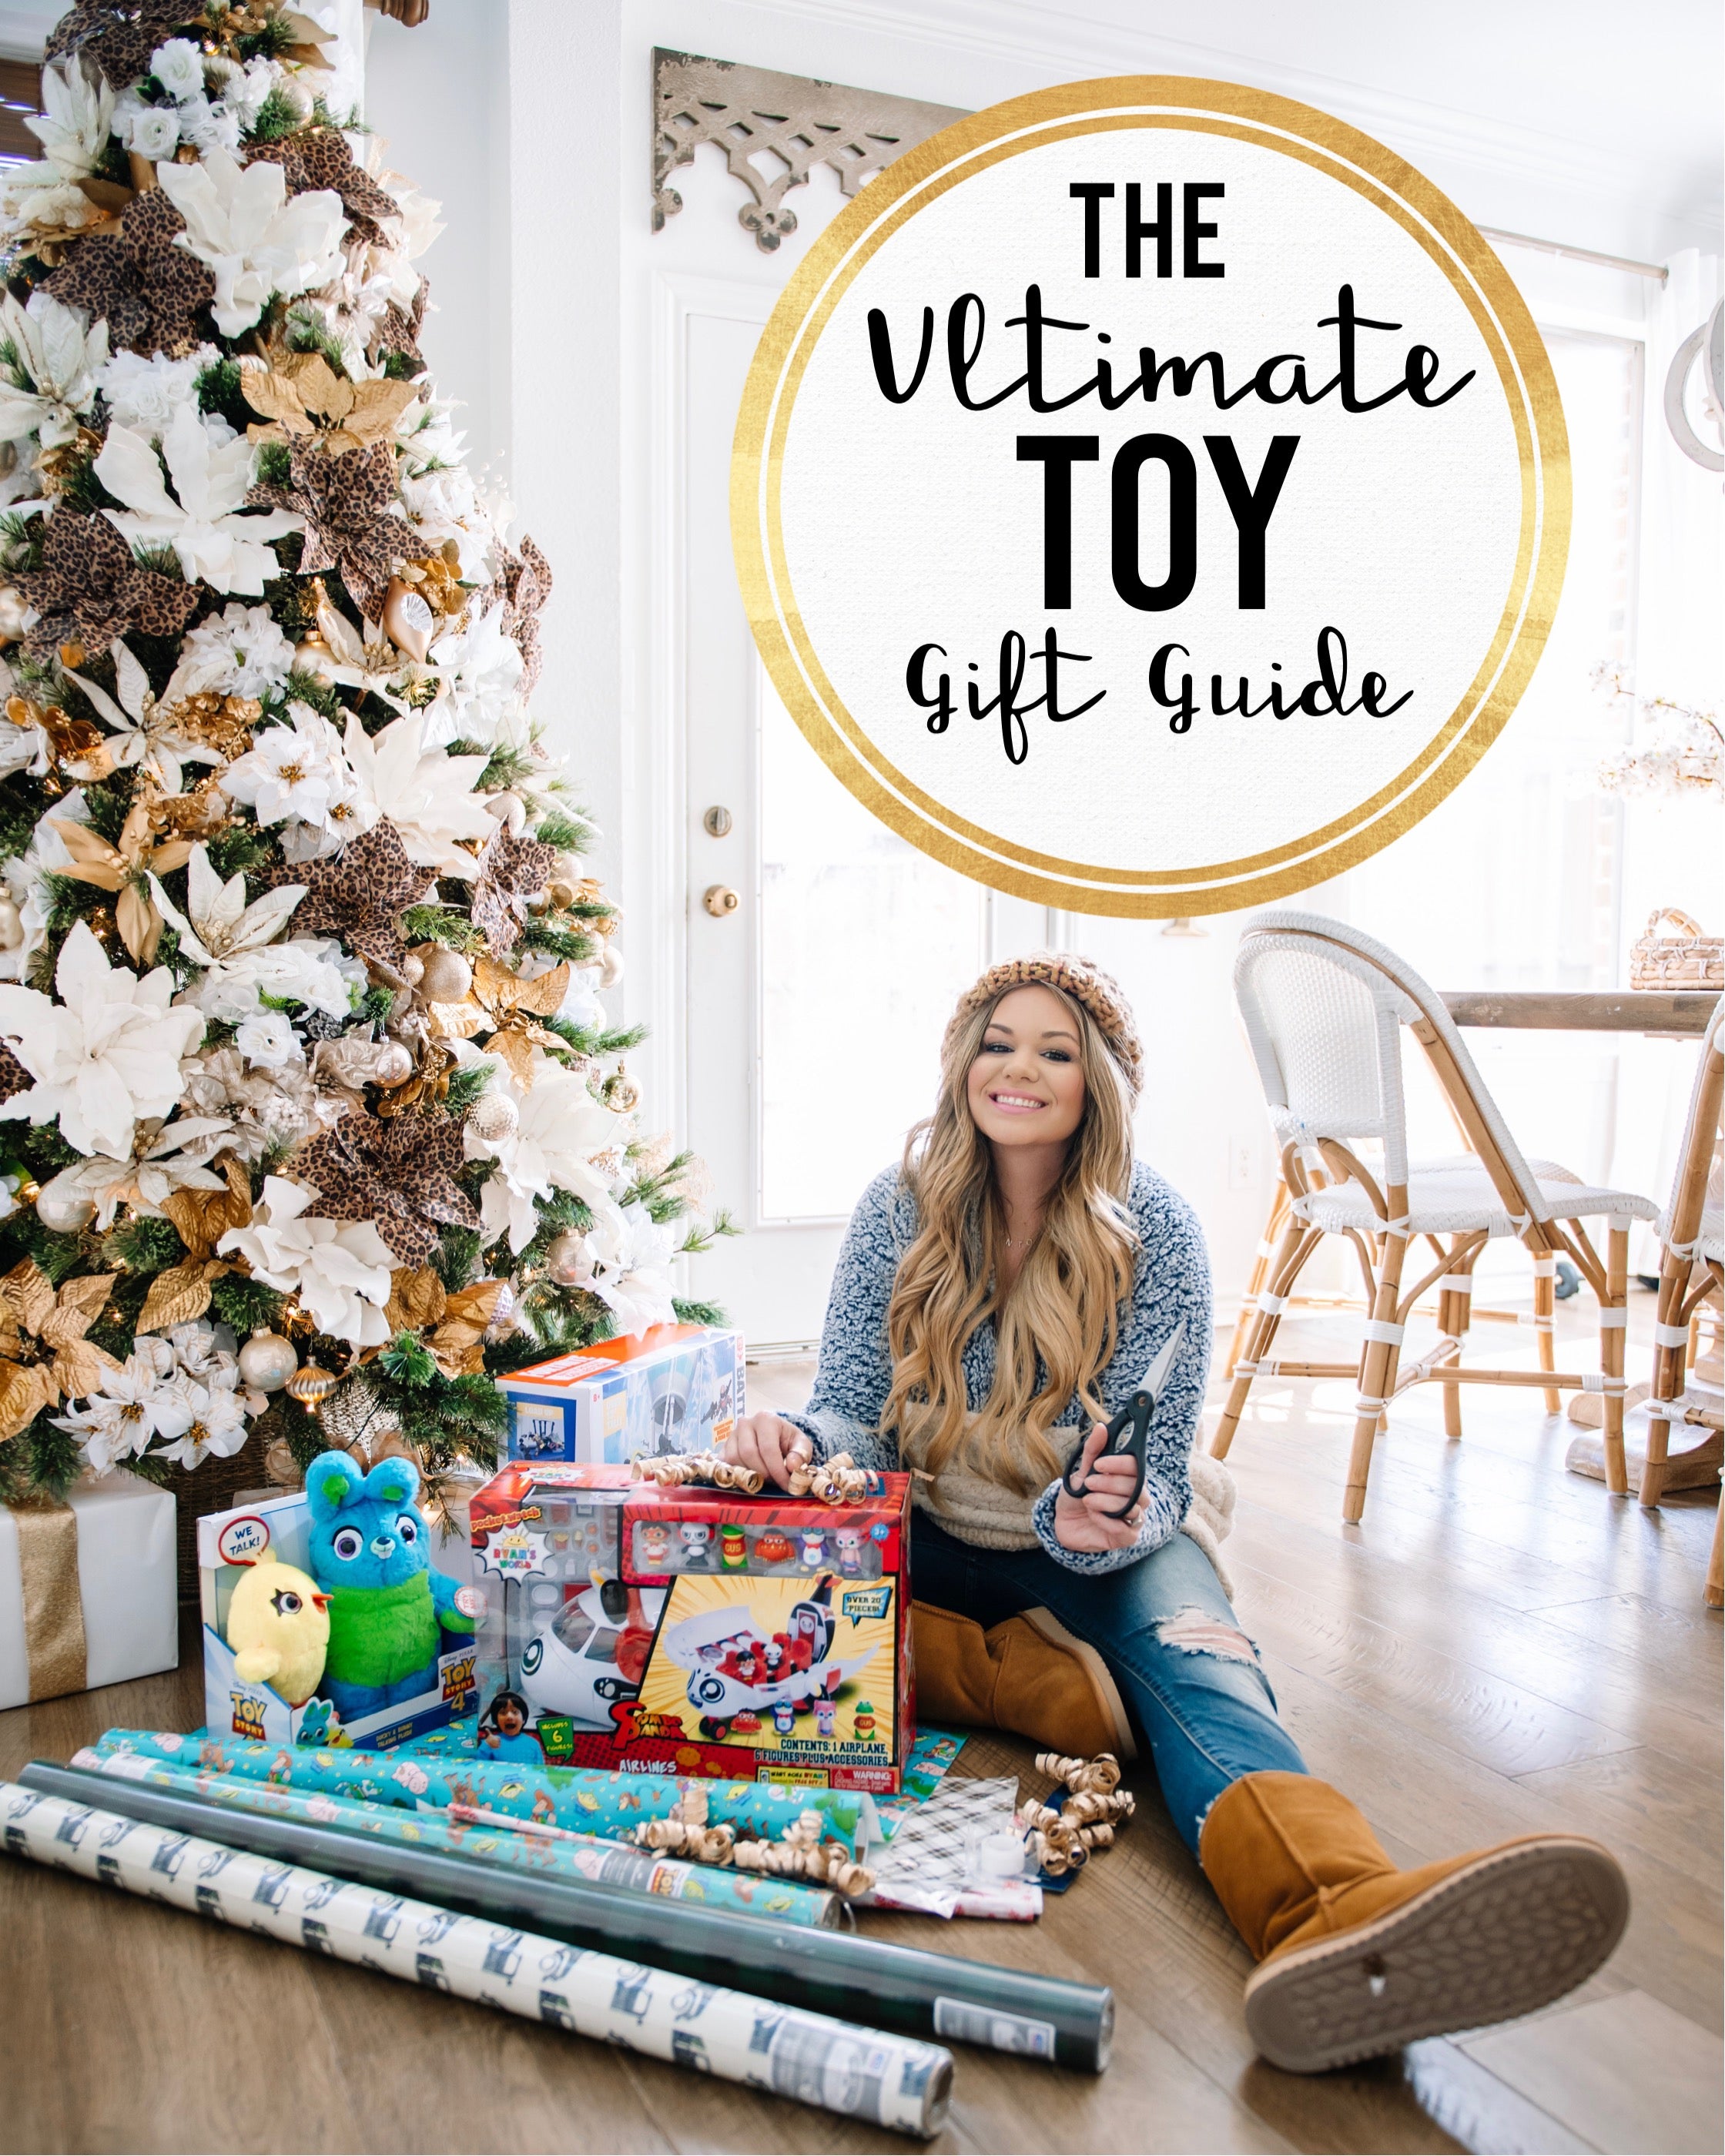 The Ultimate Toy Gift Guide